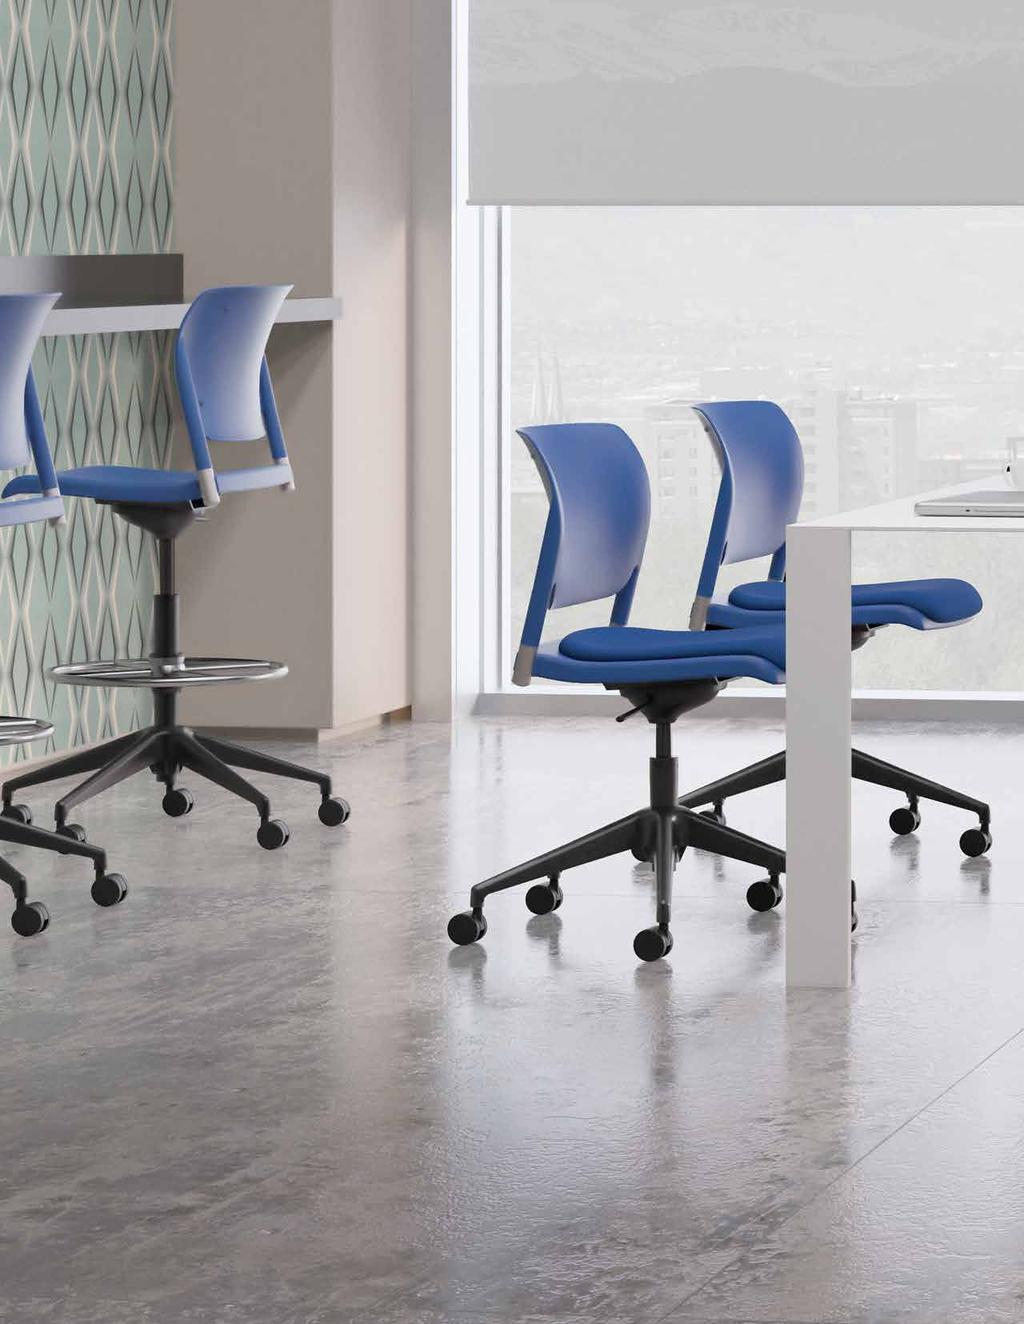 chair with flex appeal for a modern open office, creative